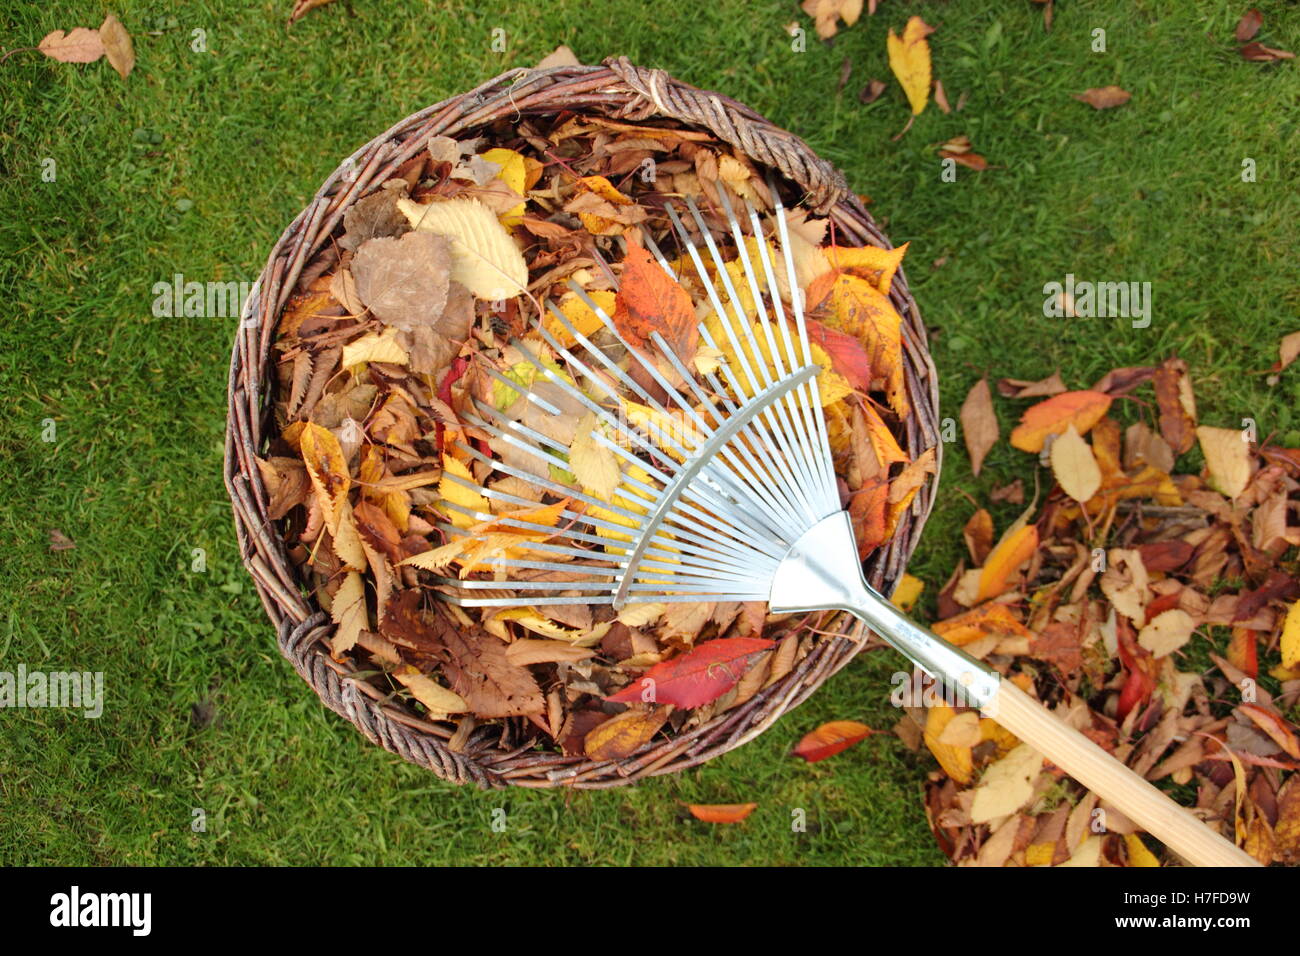 Collecting autumn leaves from a garden lawn for composting to make leaf mould mulch Stock Photo